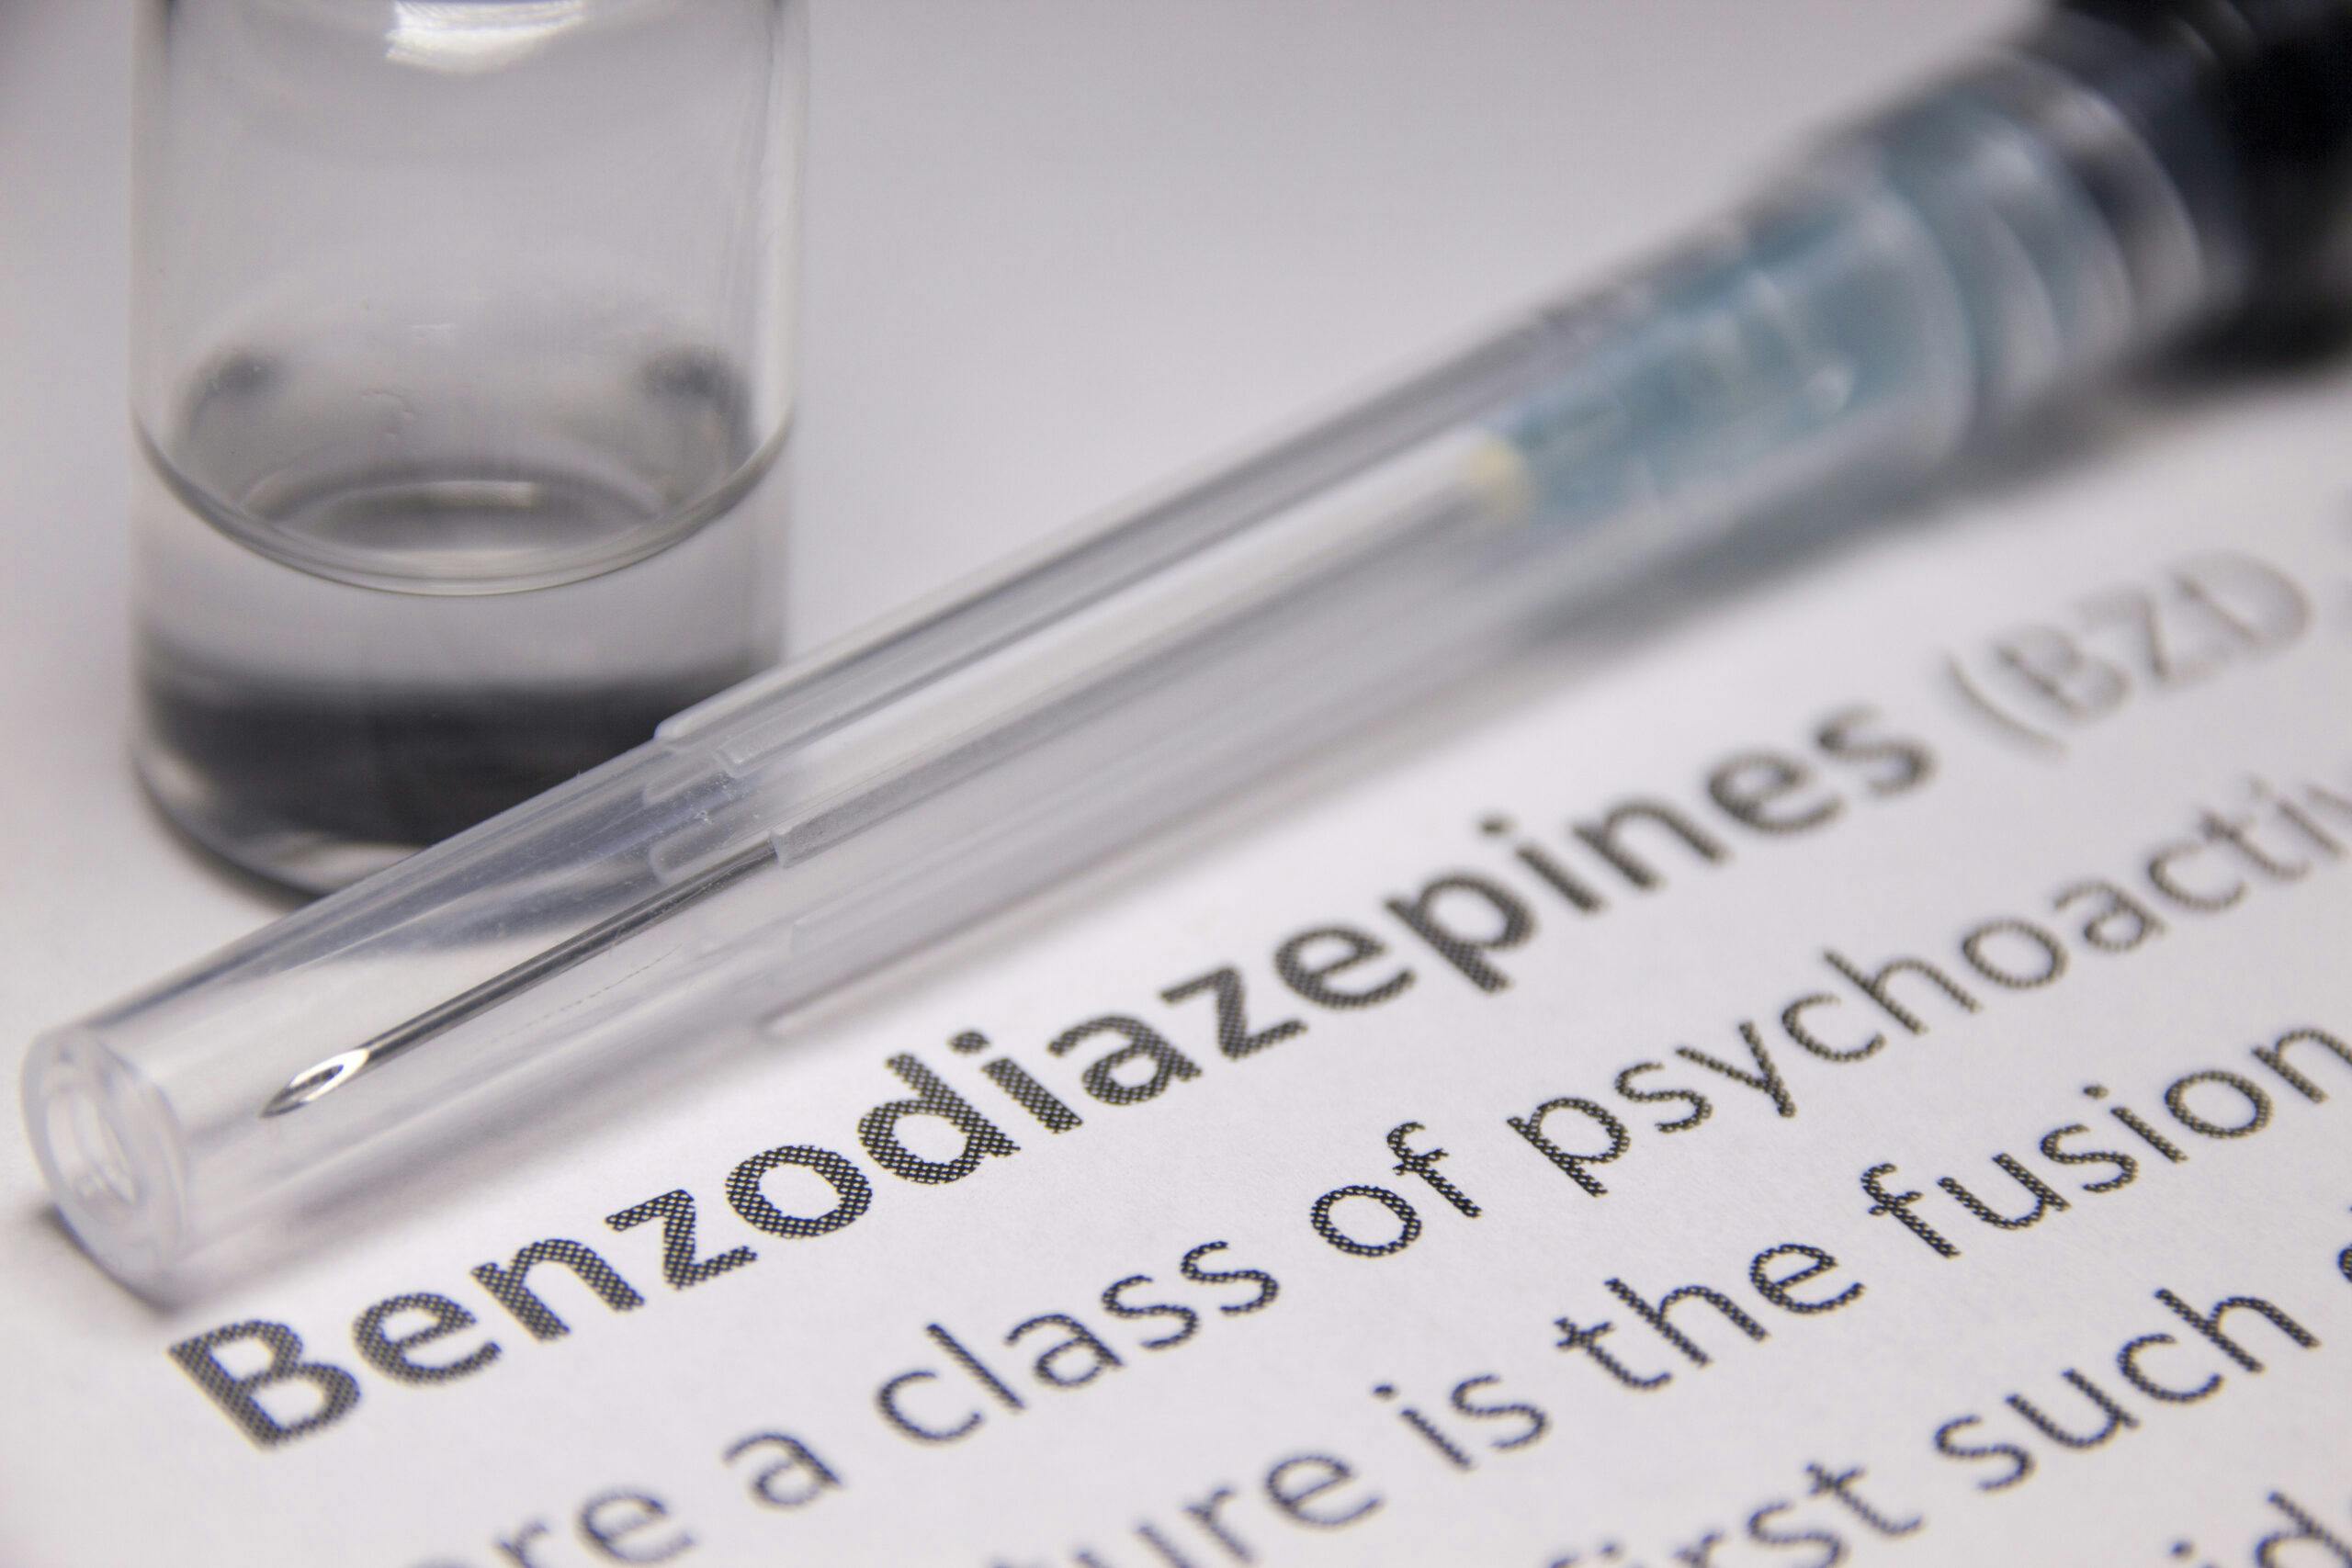 benzodiazepine definition with needle and glass